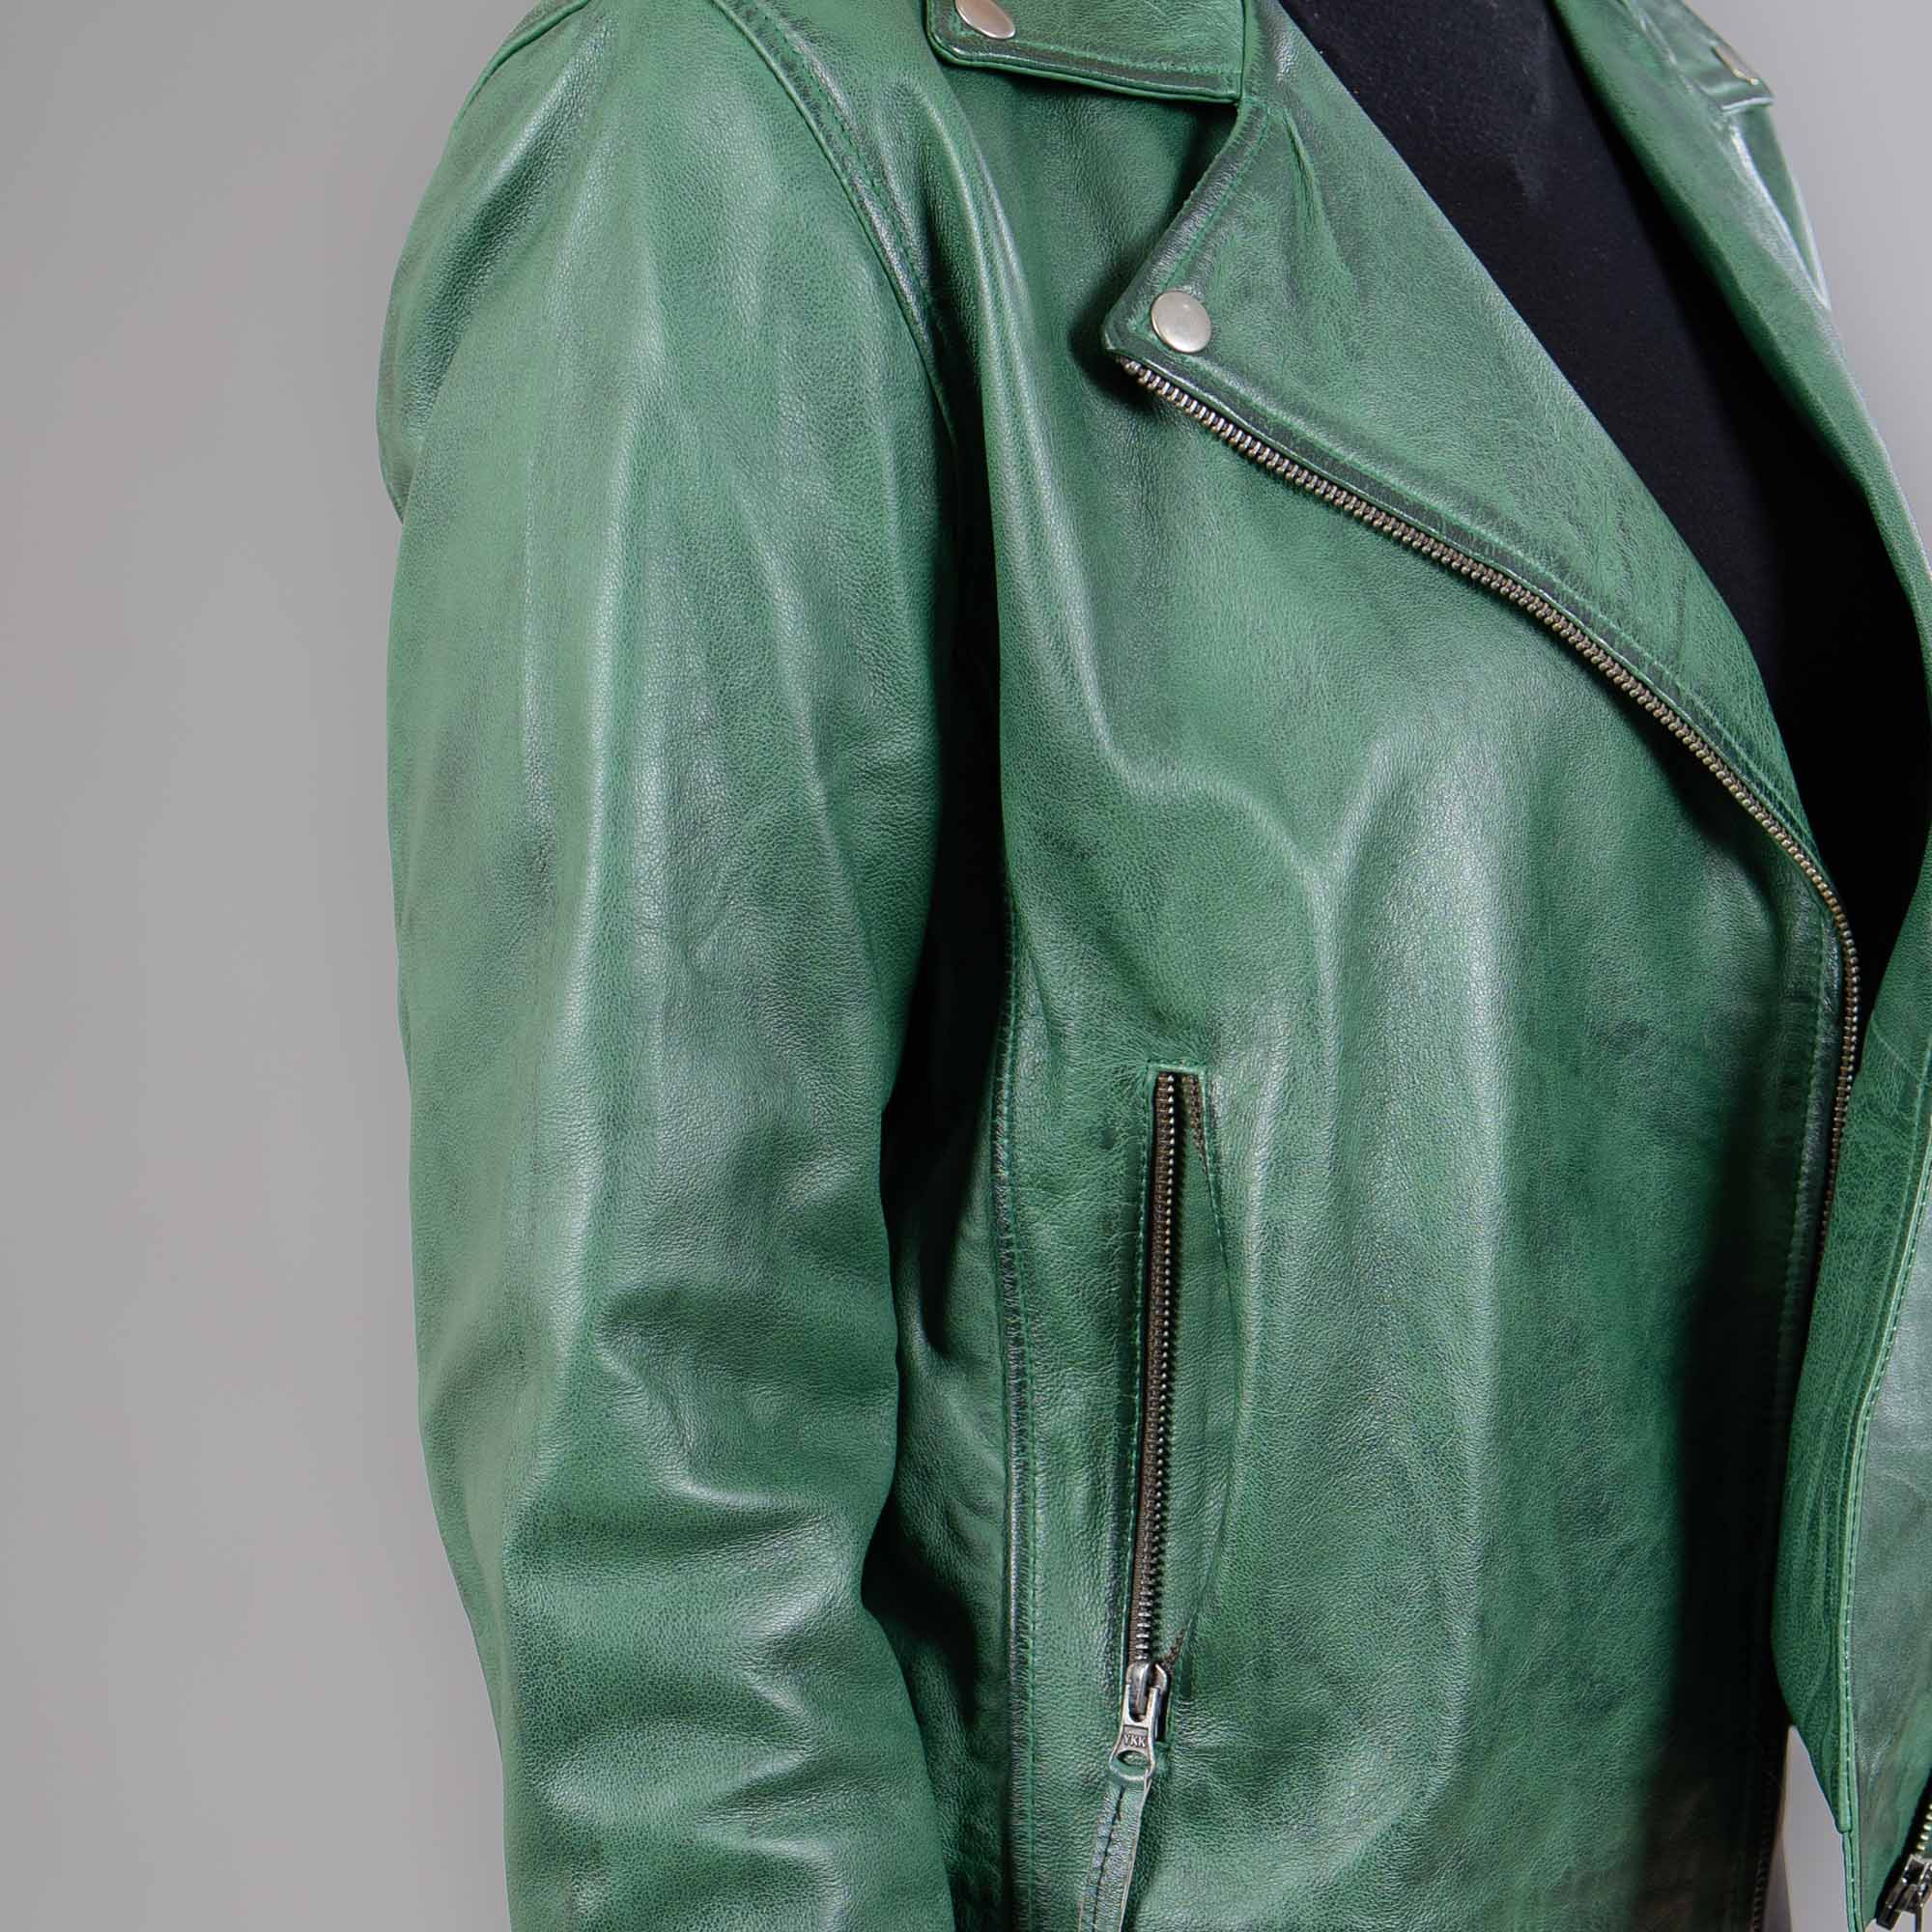 Green leather jacket with a collar